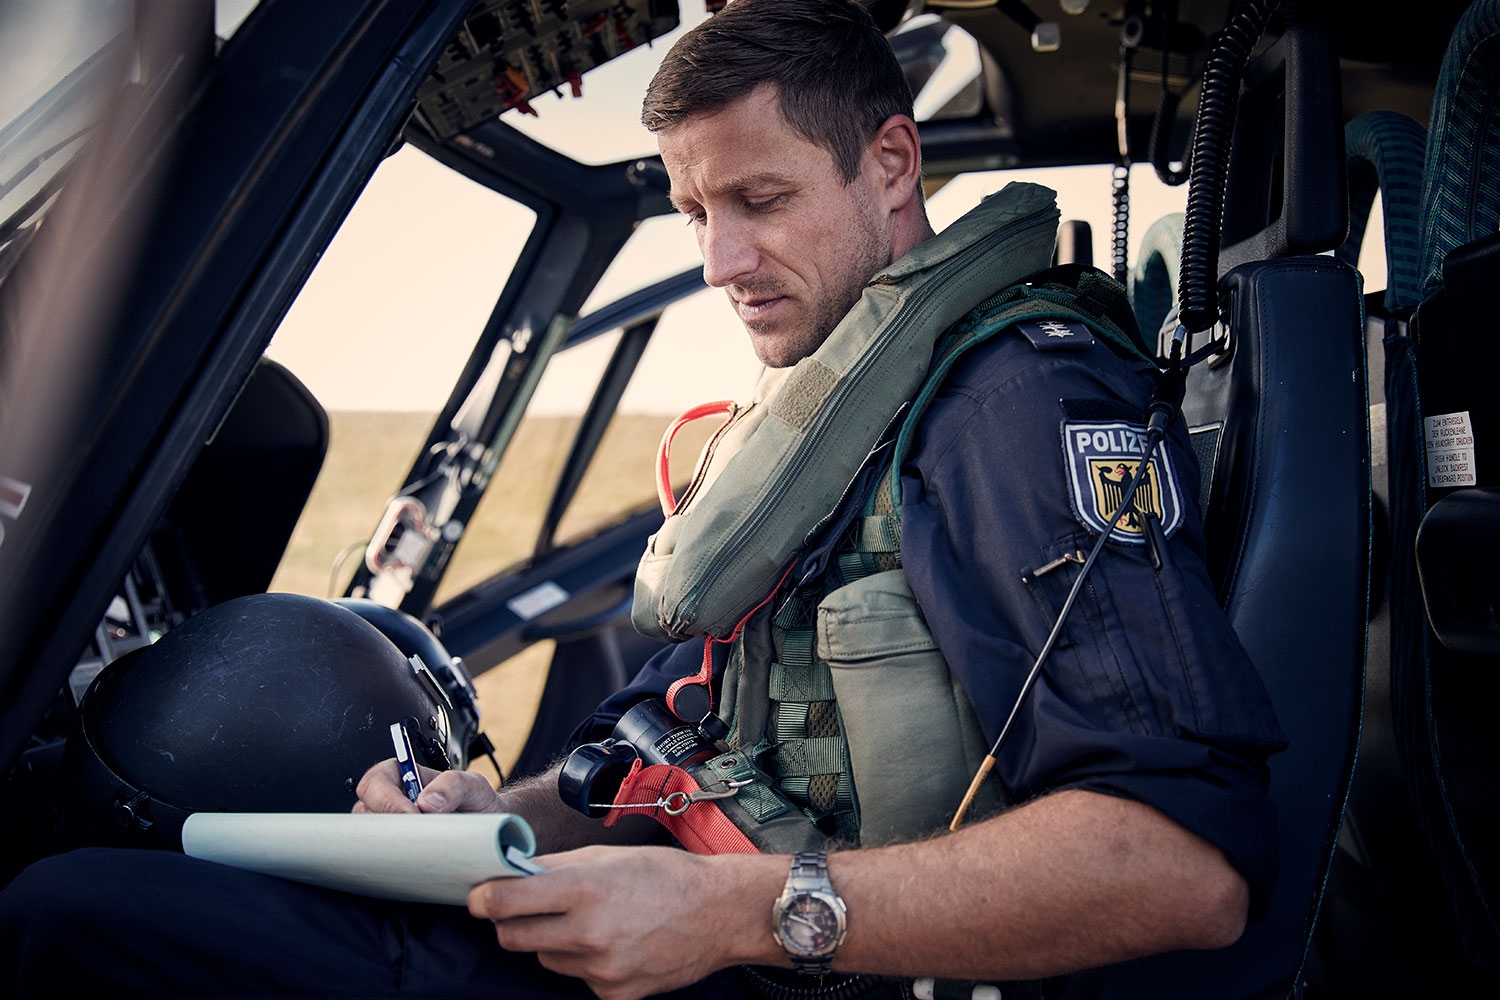 Federal Police pilot in the helicopter reading the training plan